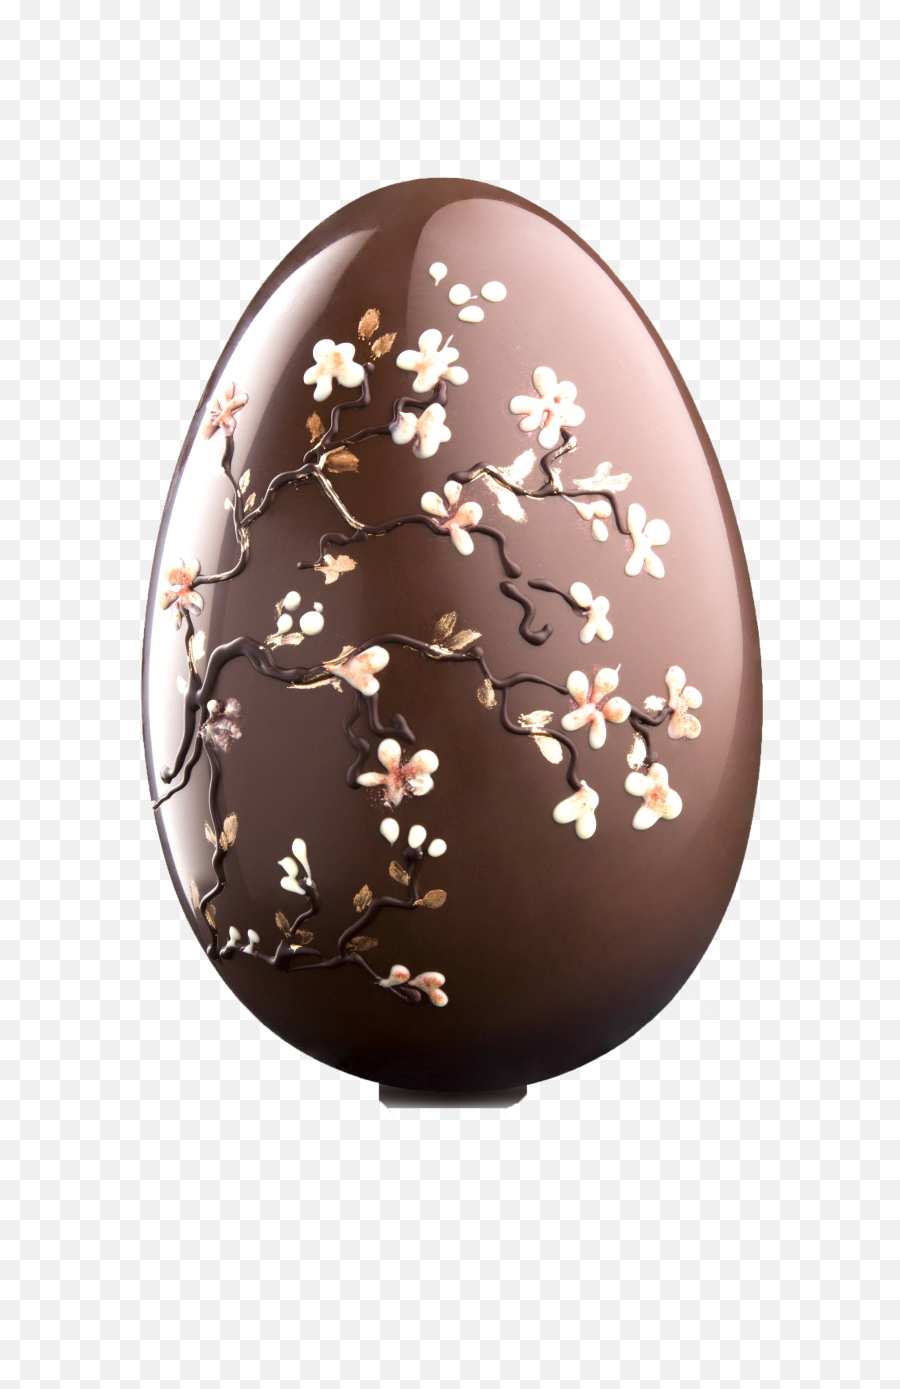 Download Chocolate Egg Png Free Images - Egg Png Image With Egg,Egg Png